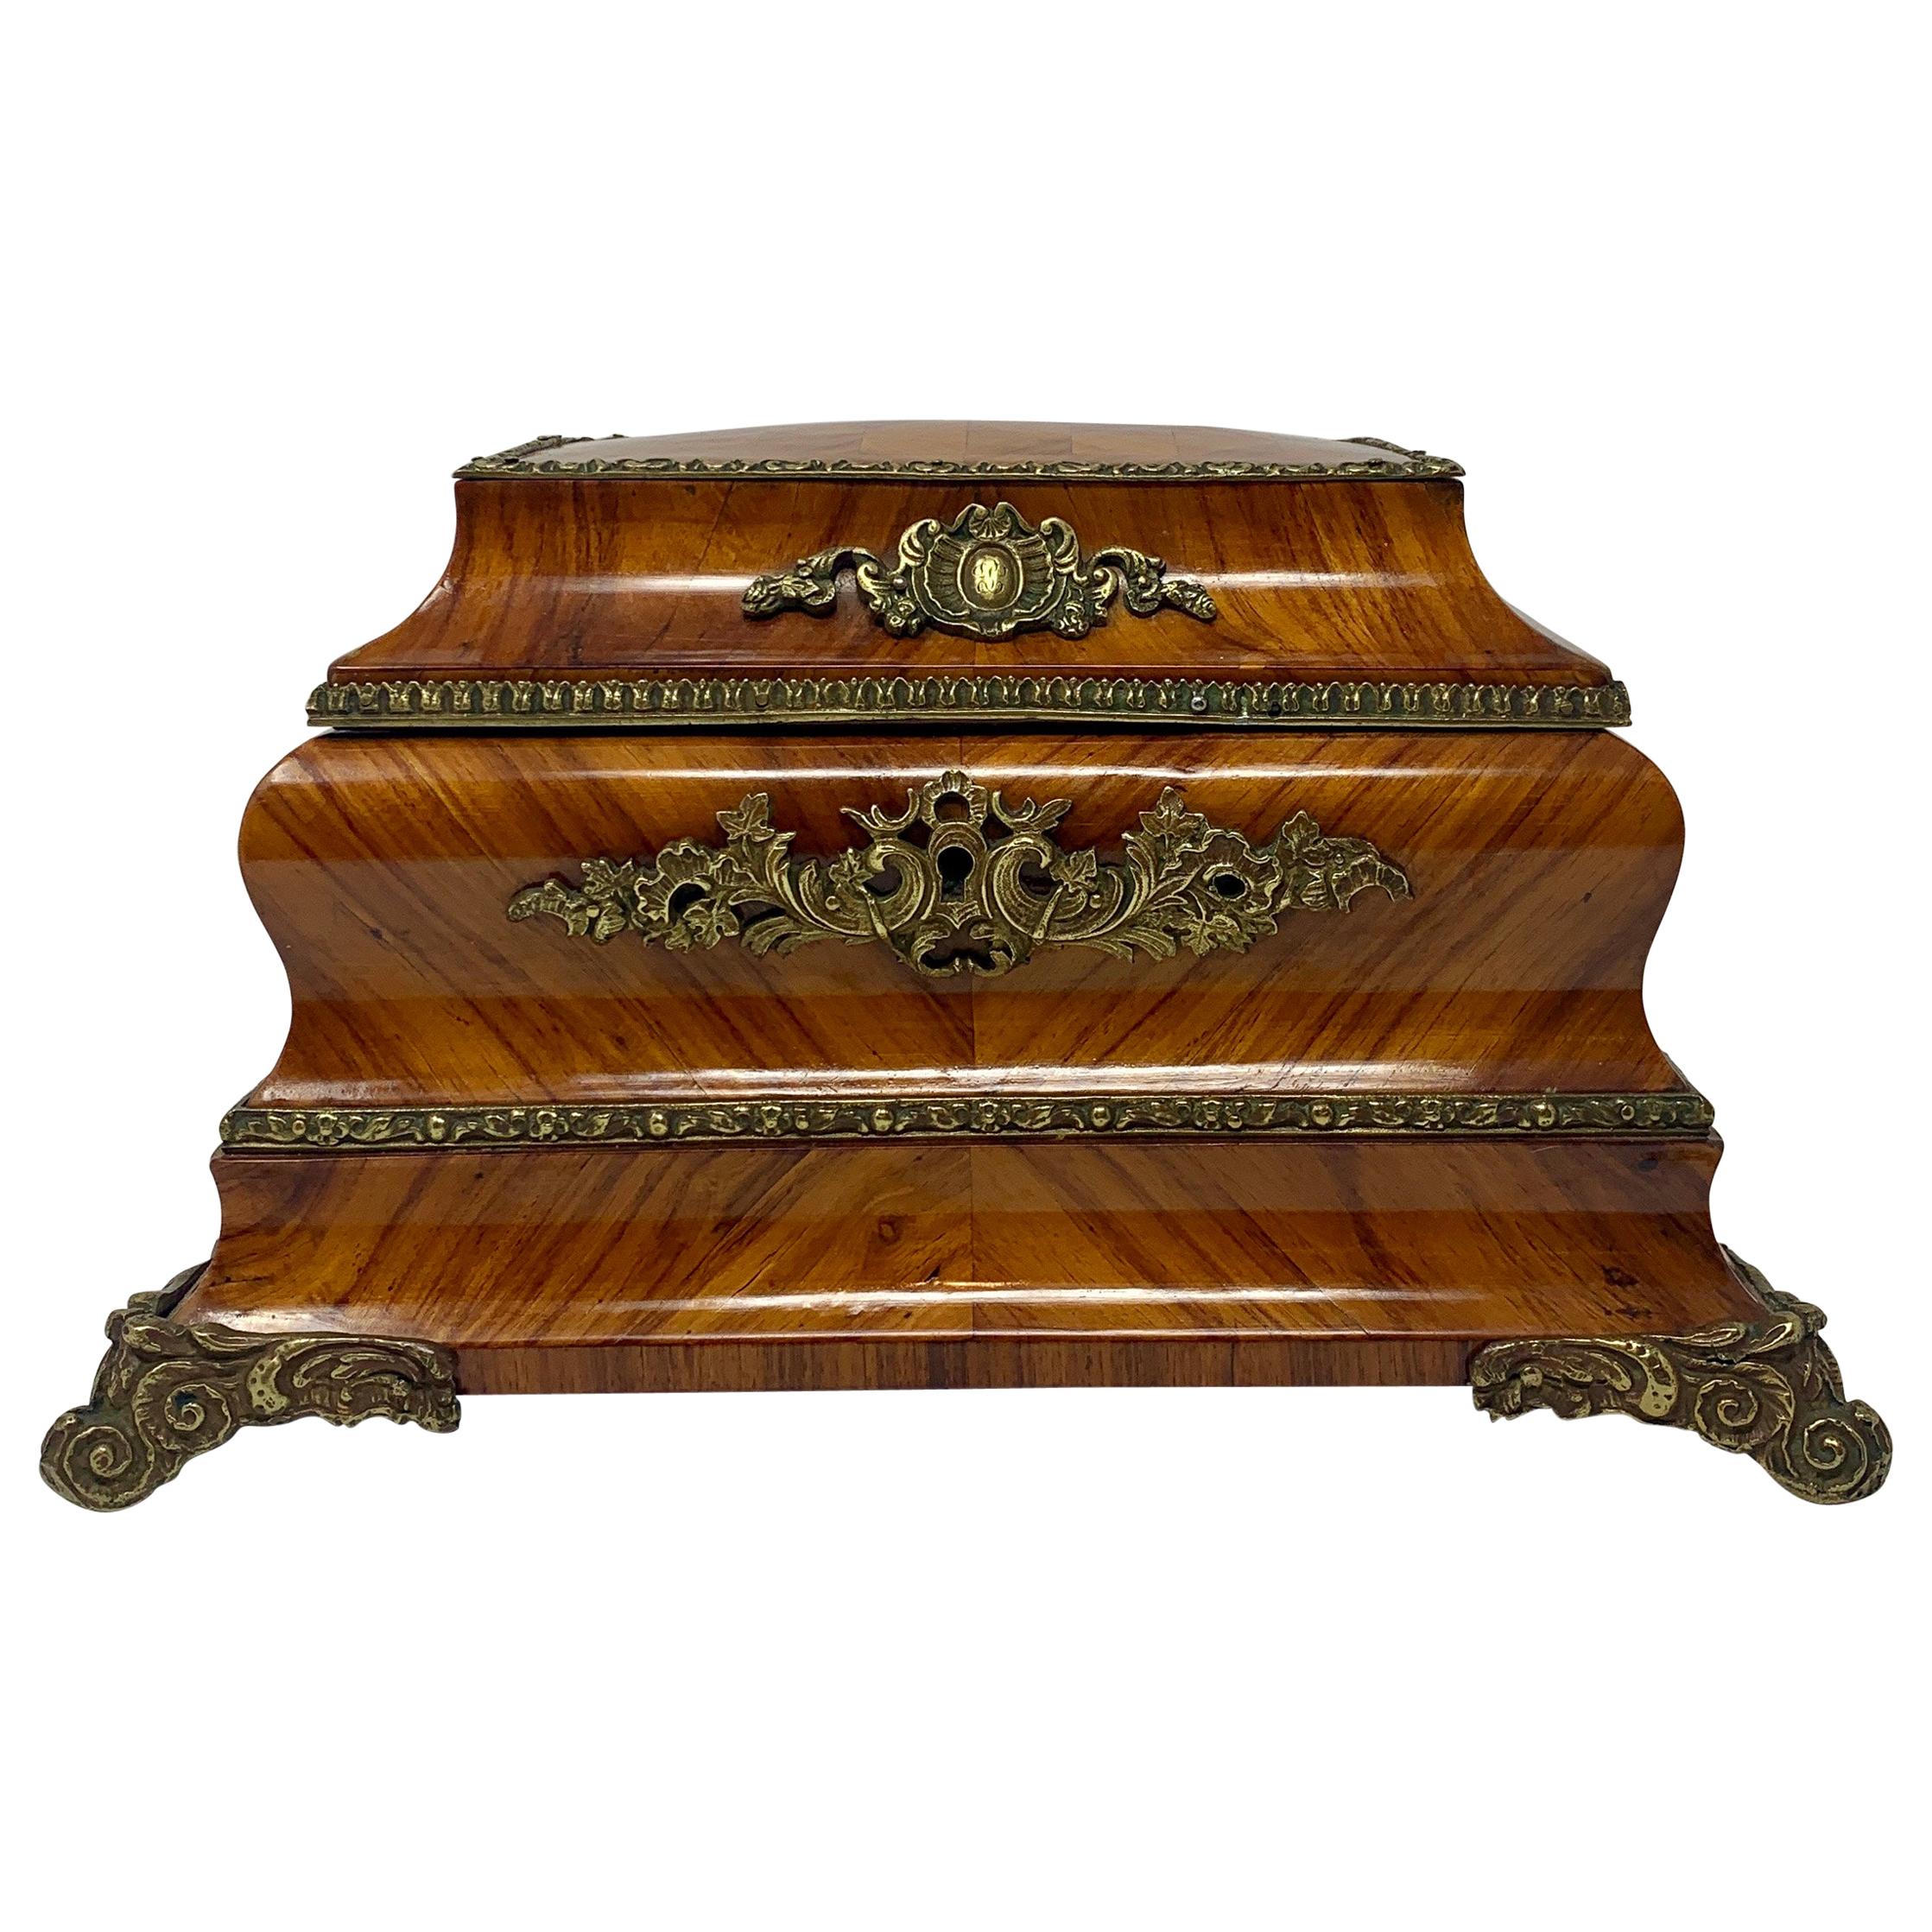 Antique French Shaped Kingwood Jewel Box For Sale